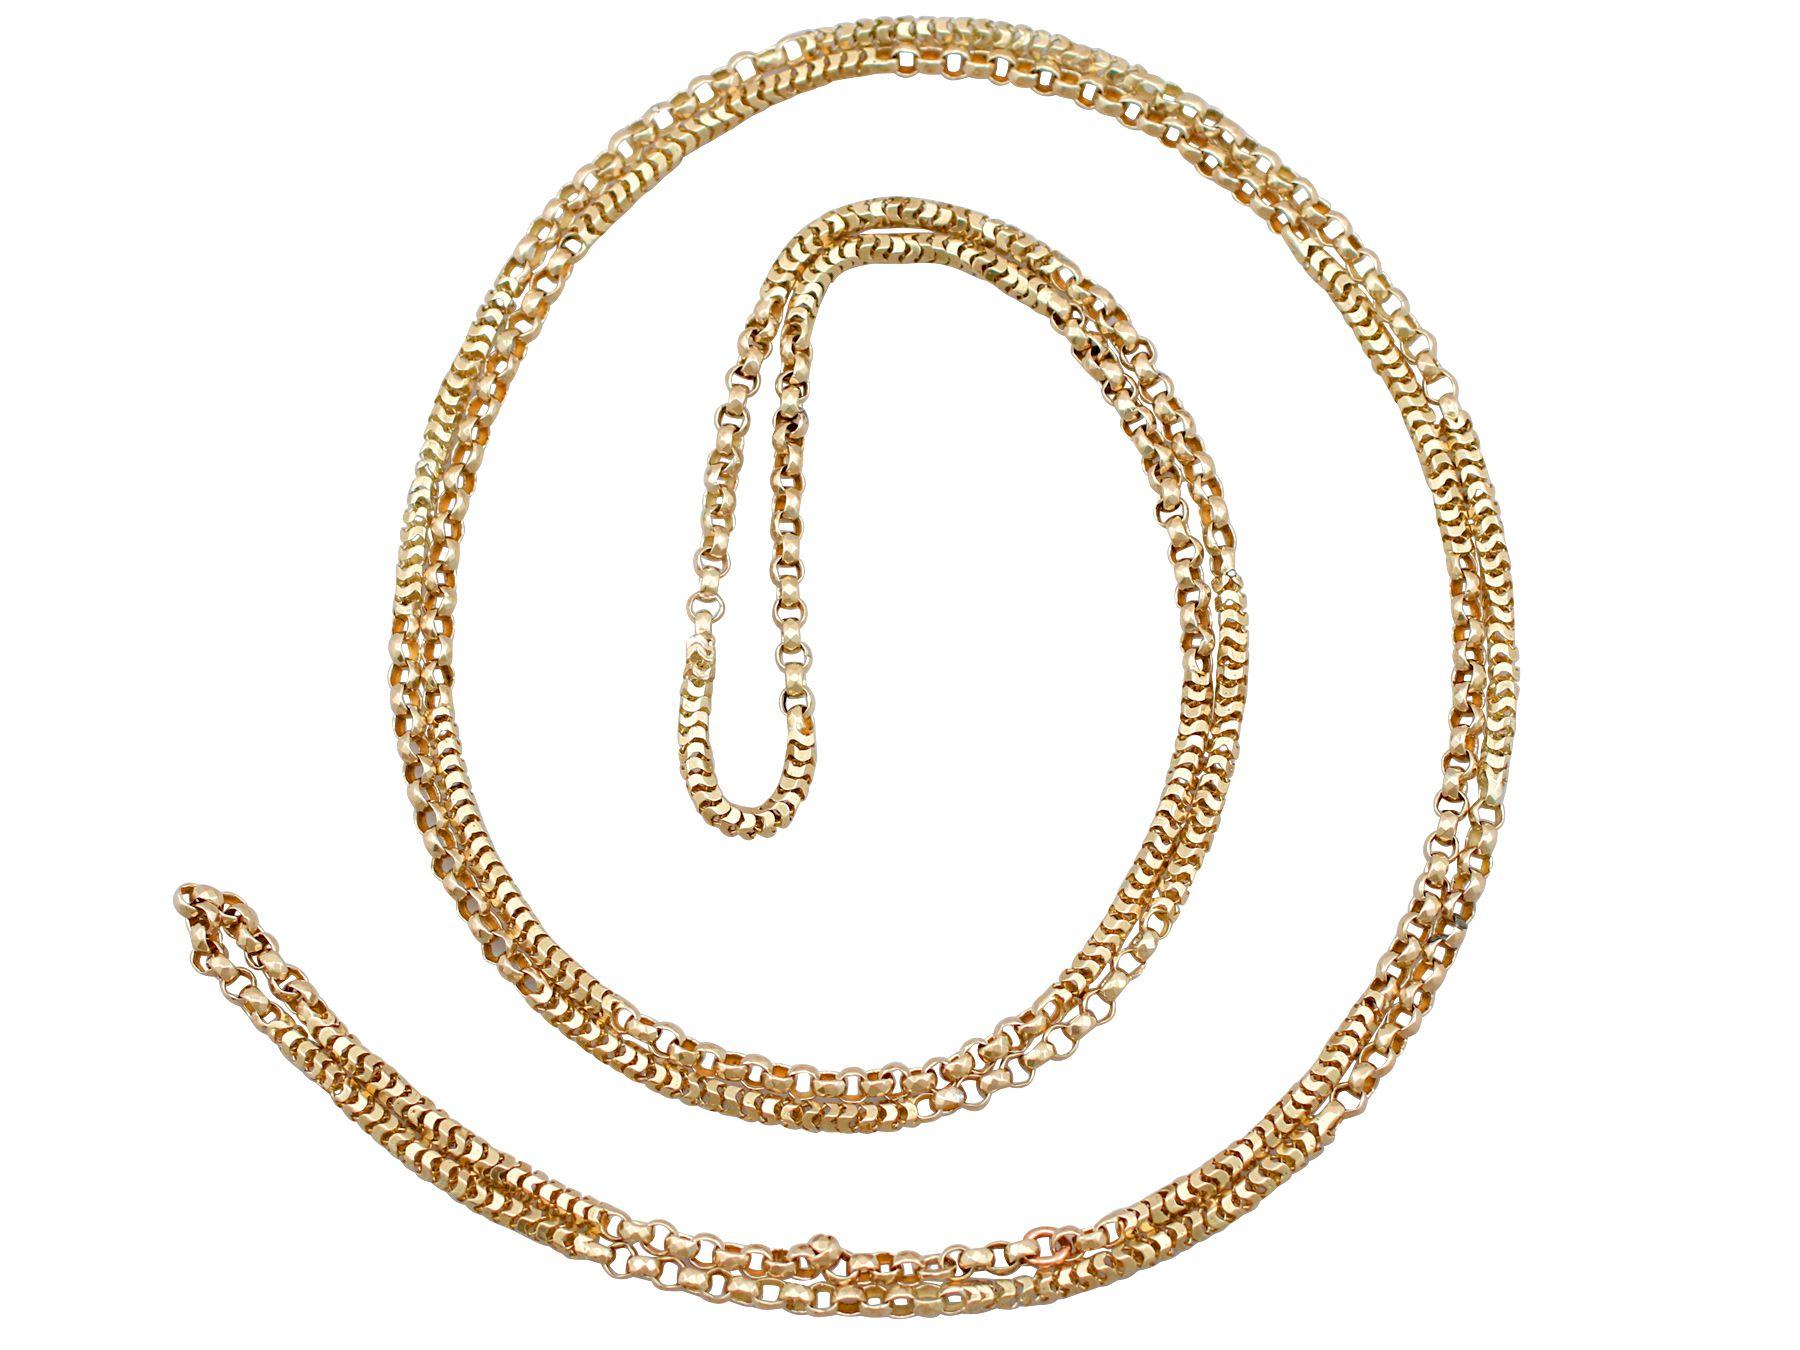 An impressive antique Victorian 9 karat yellow gold longuard chain; part of our diverse antique jewelry and estate jewelry collections.

This fine and impressive Victorian chain has been crafted in 9k yellow gold.

The longuard style chain is